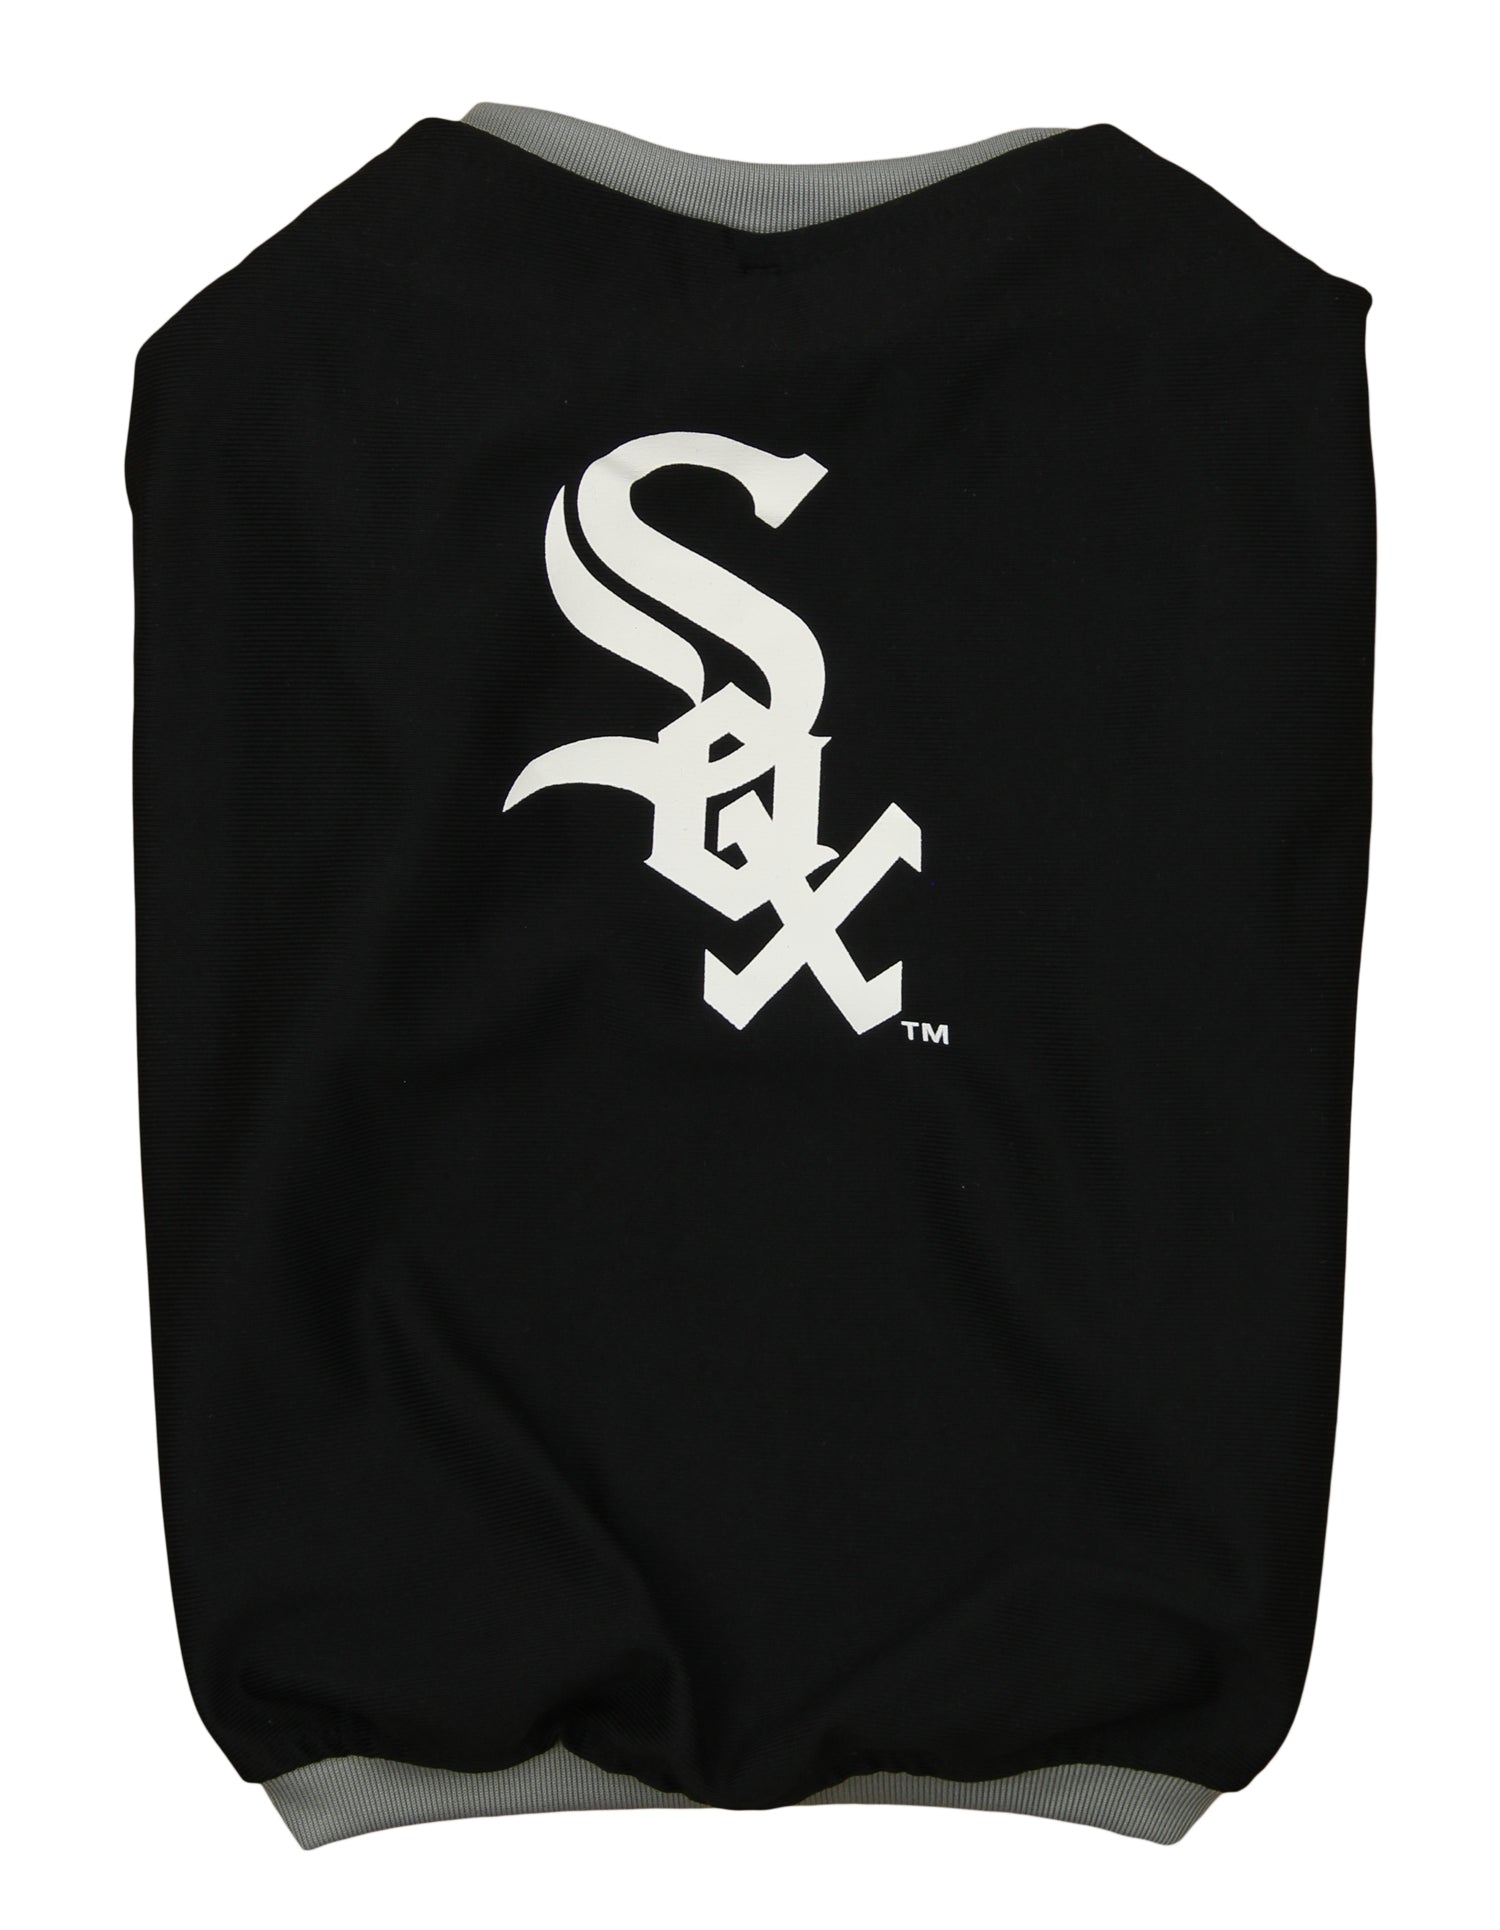 Chicago White Sox Kids Apparel, White Sox Youth Jerseys, Kids Shirts,  Clothing